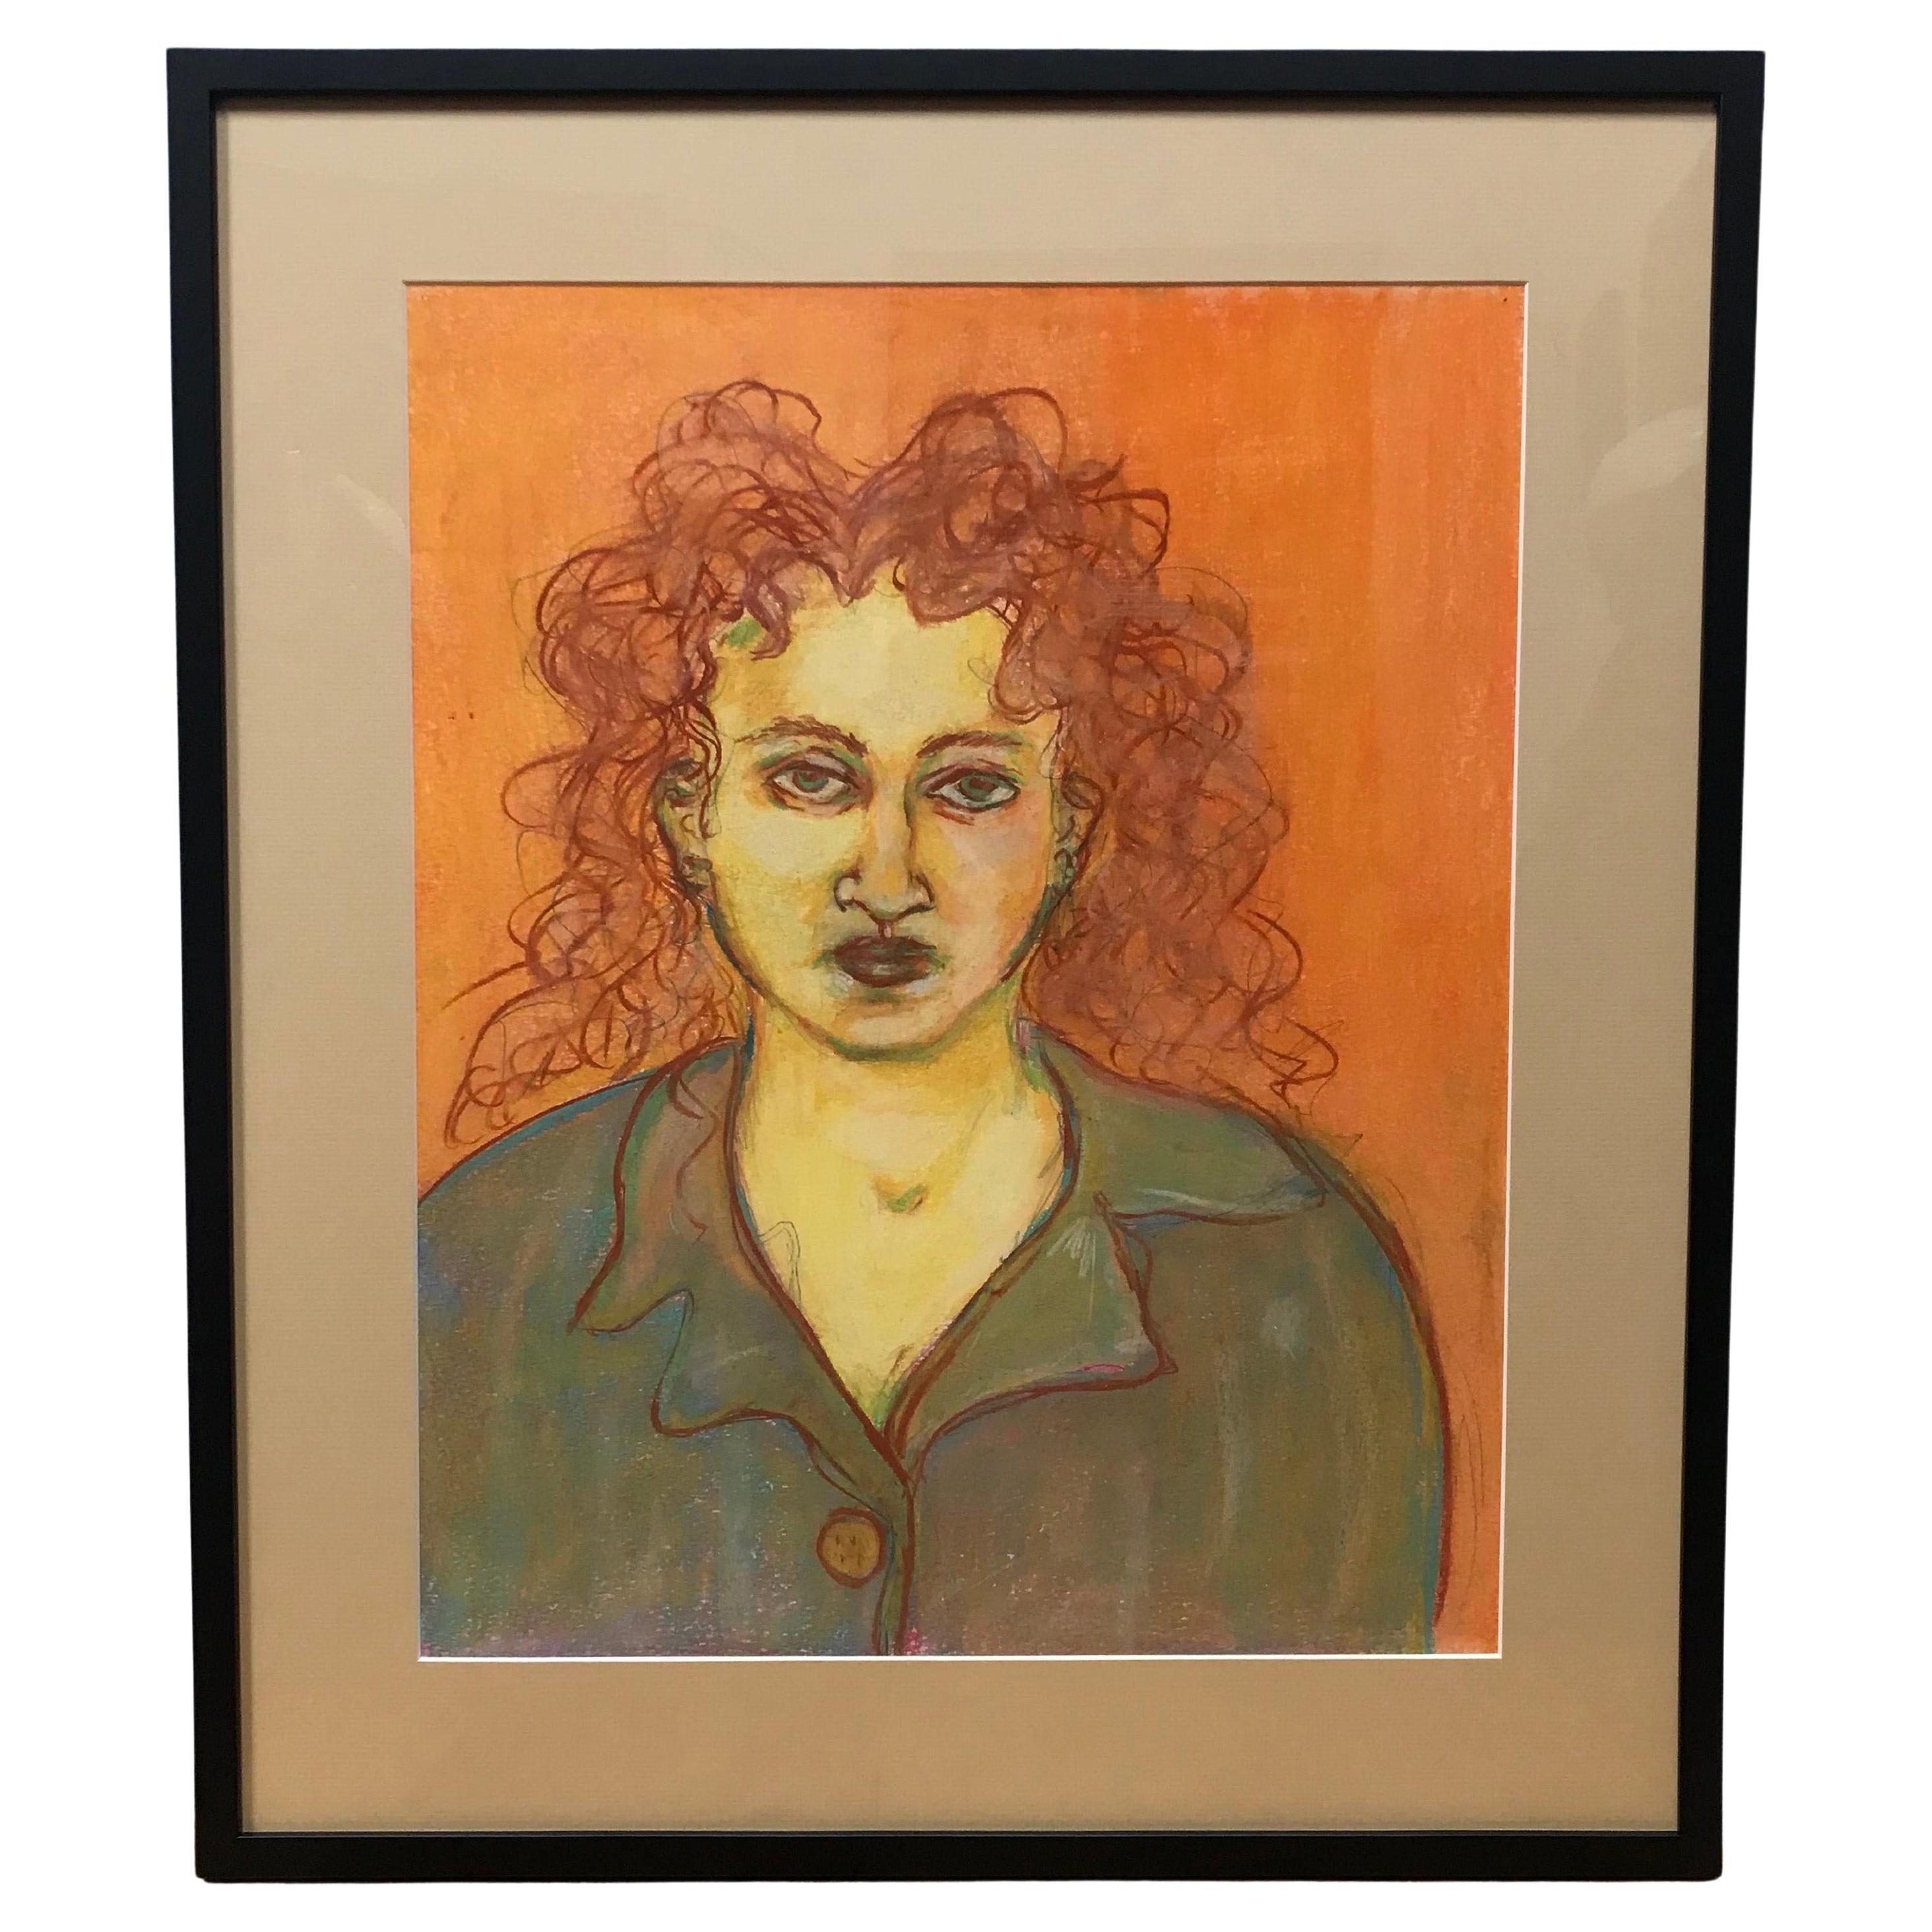 Pastel portrait of a woman by Gillian Lefkowitz. Her portraits are known to convey the mood of the person she painted.
After her career as a professional photographer and Fine Art painter, Gillian became a Los Angeles-based interior decorator.